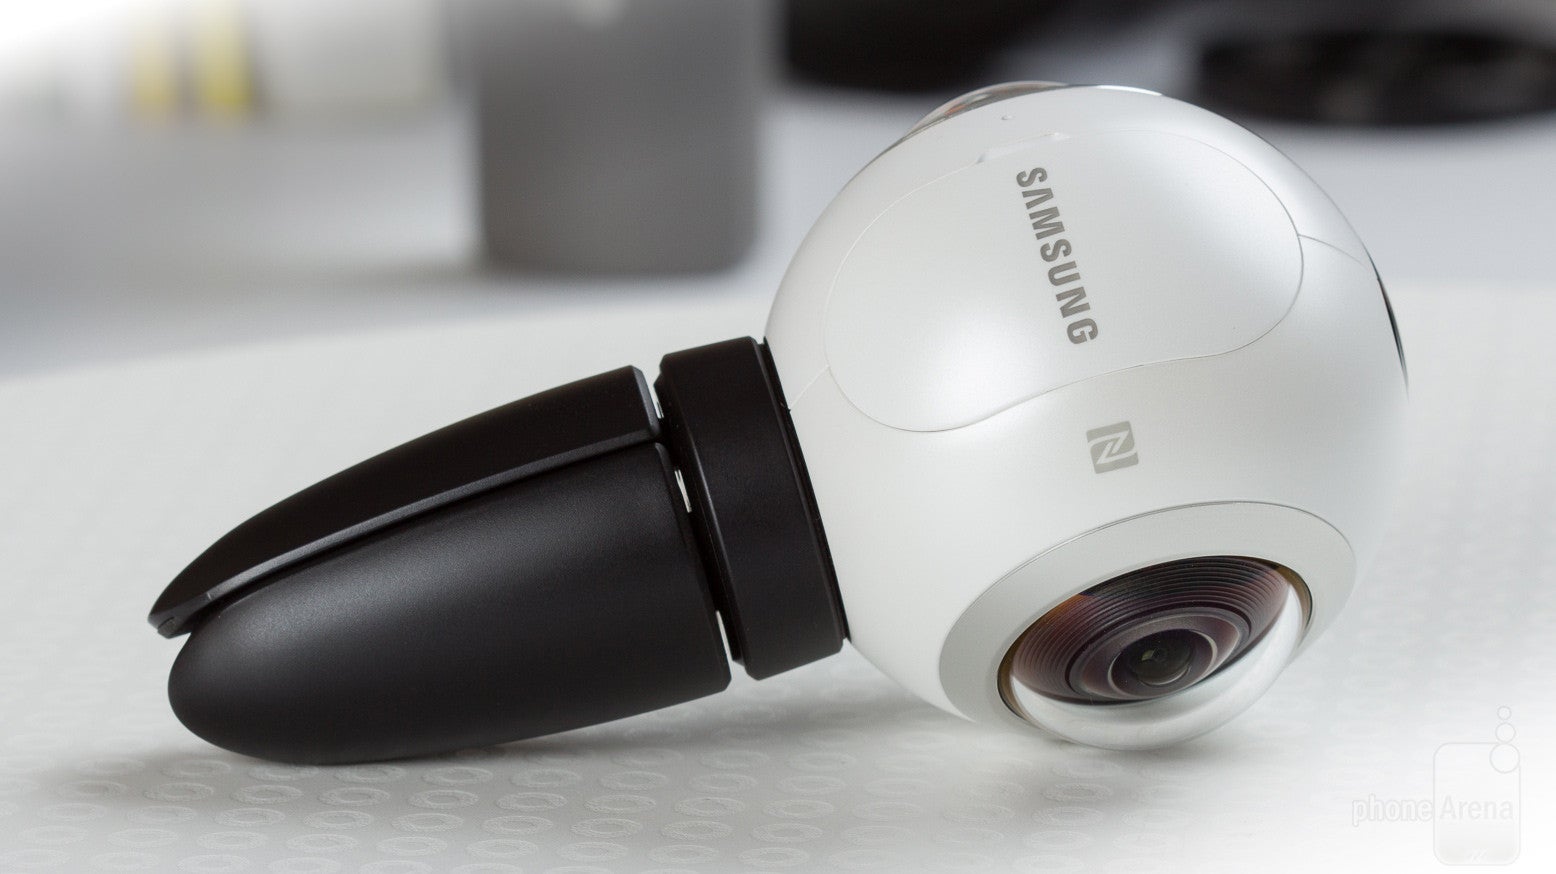 MobileFun offers tons of Black Friday discounts, including a Samsung Gear 360 for just $86!